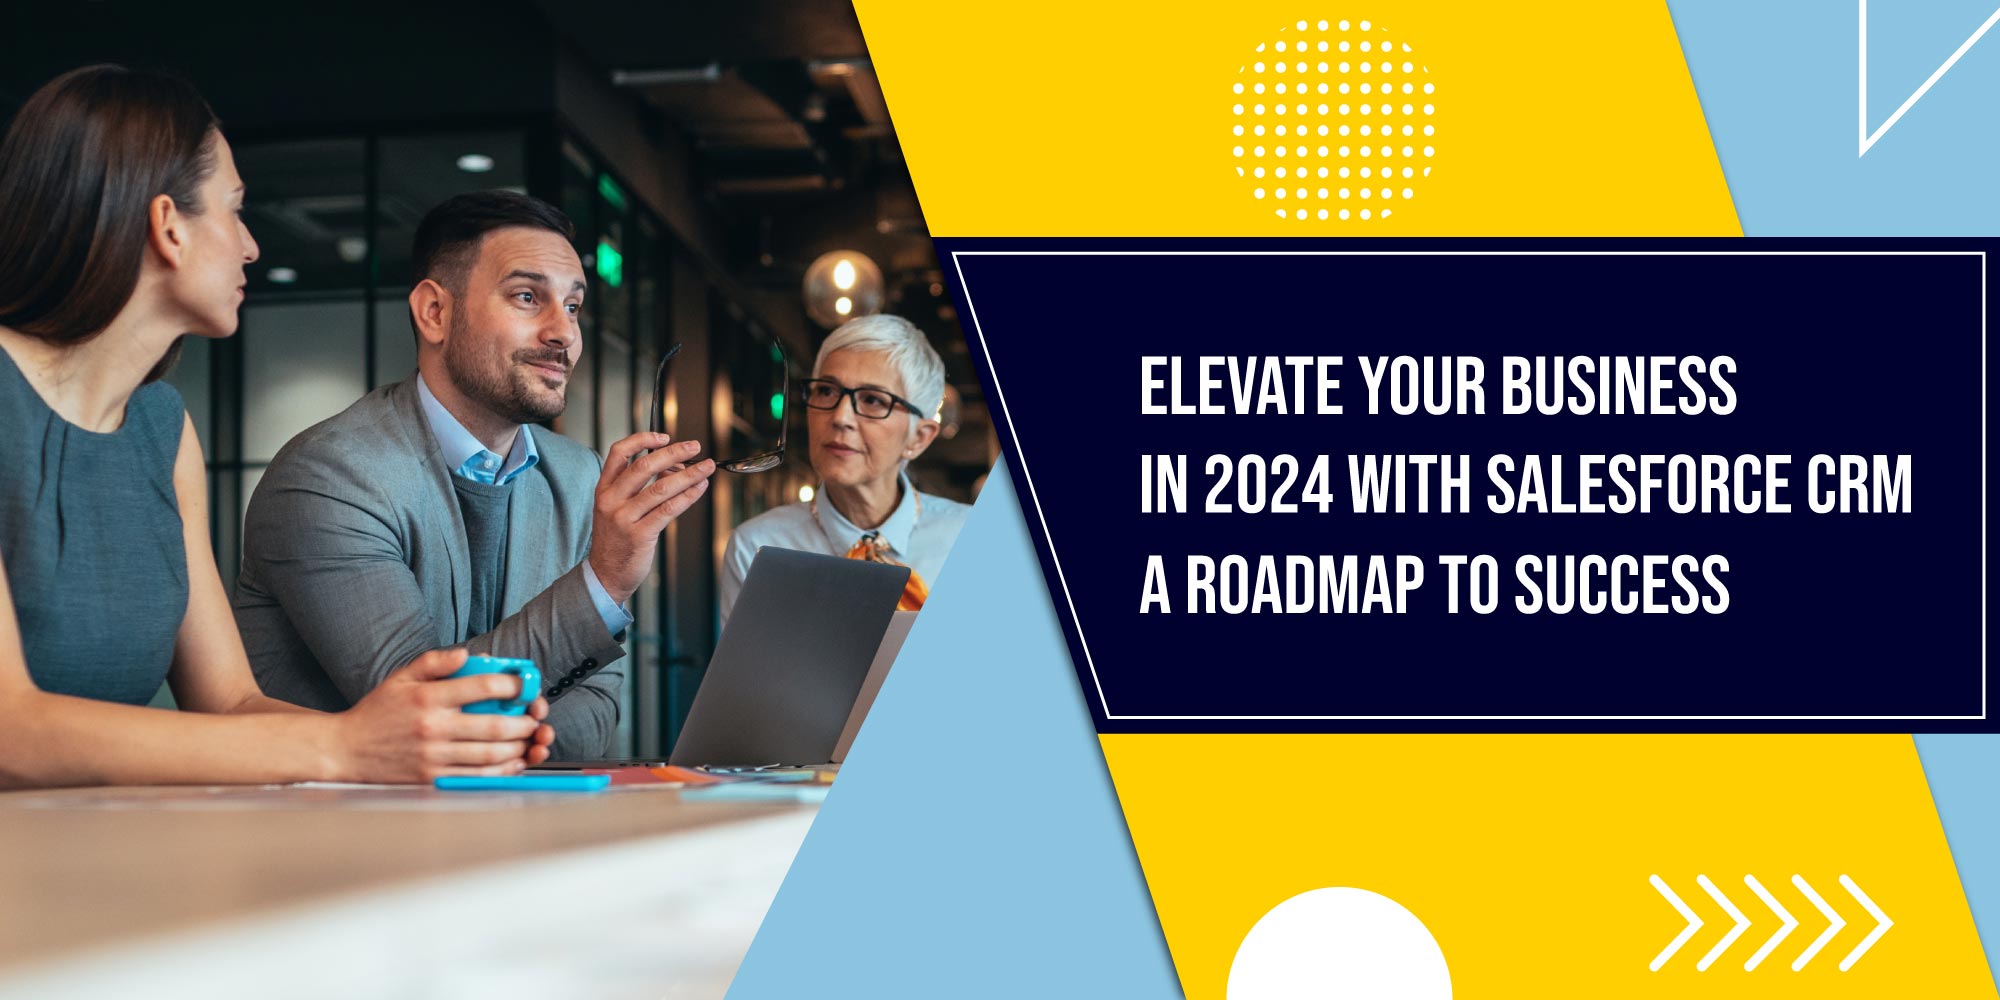 elevate your business in 2024 with salesforce crm a roadmap to success